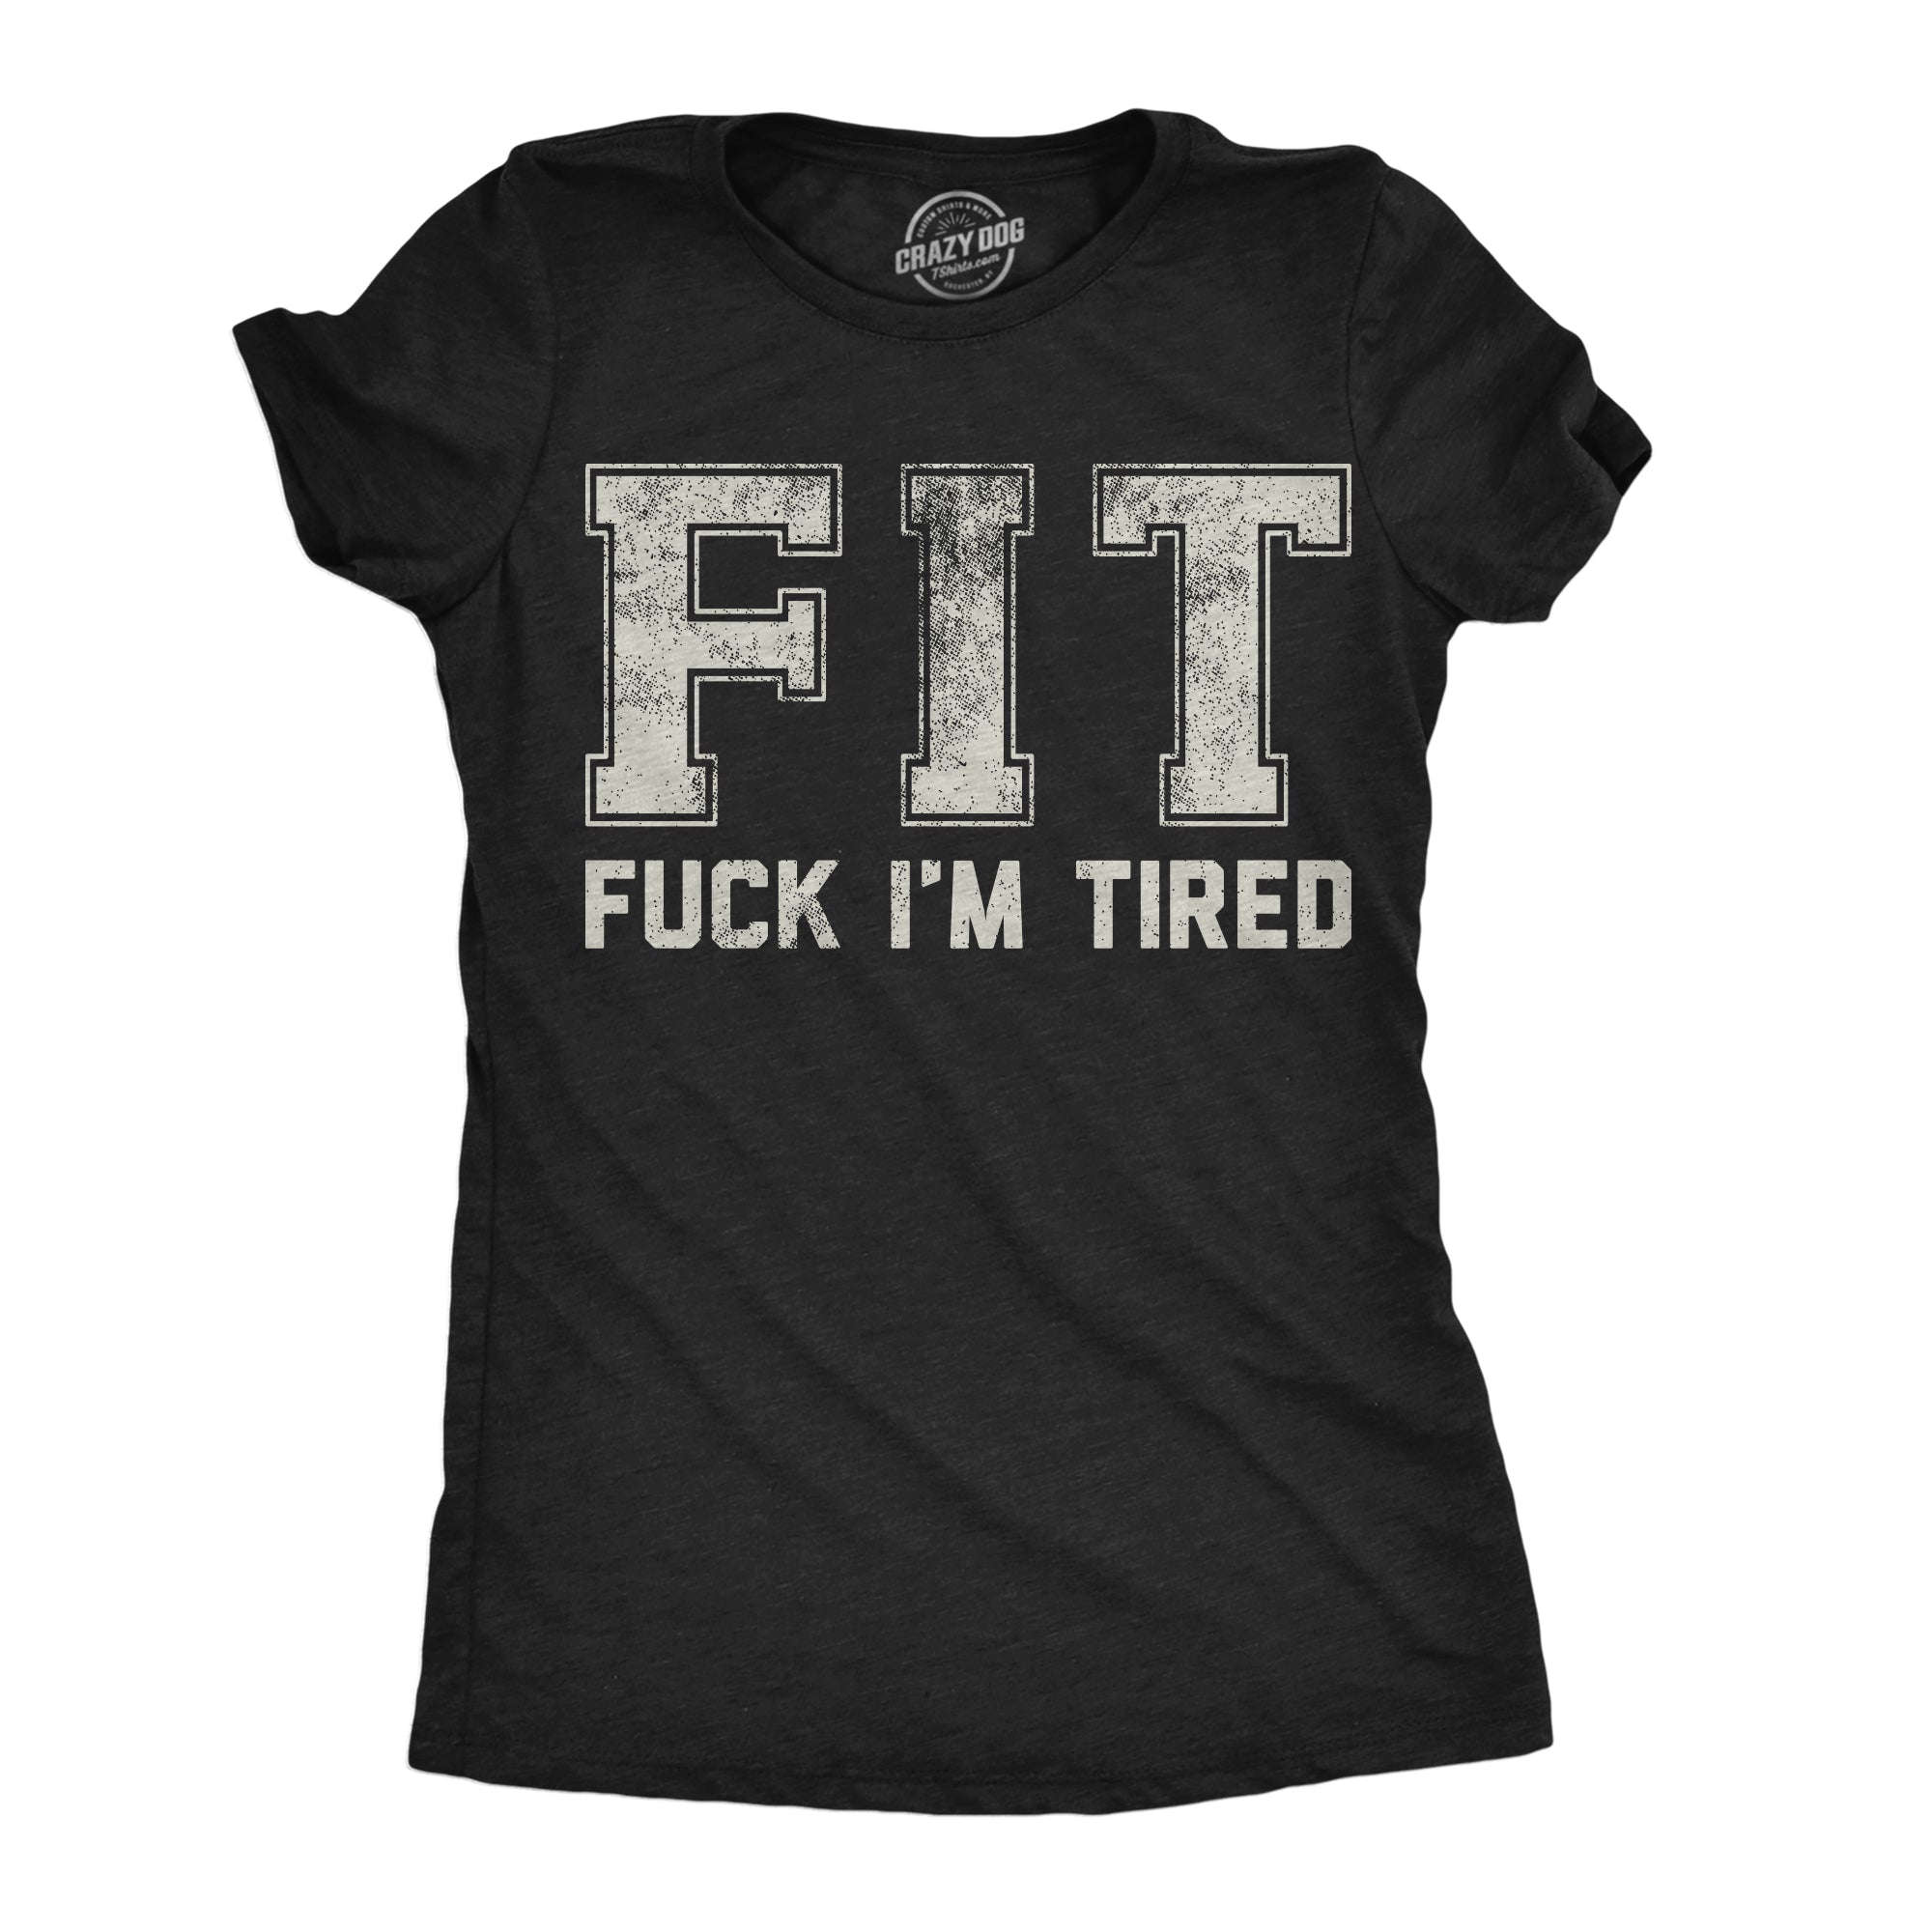 Funny Heather Black - FIT Fuck Im Tired FIT Fuck Im Tired Womens T Shirt Nerdy sarcastic Tee